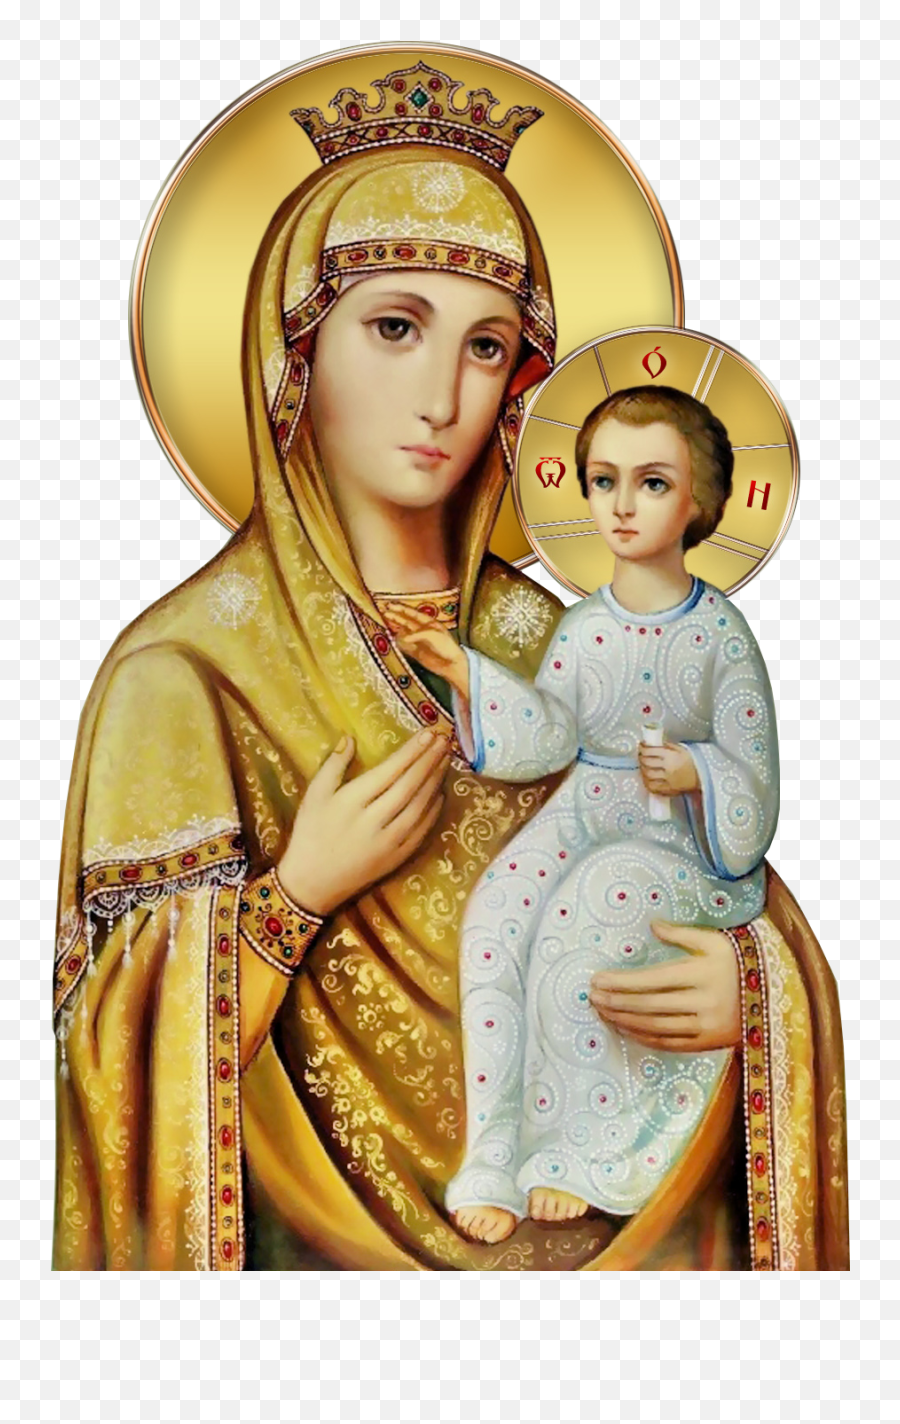 Download Depiction Of The Virgin Mary And Jesus - Mary Emoji,Mary And Jesus Clipart